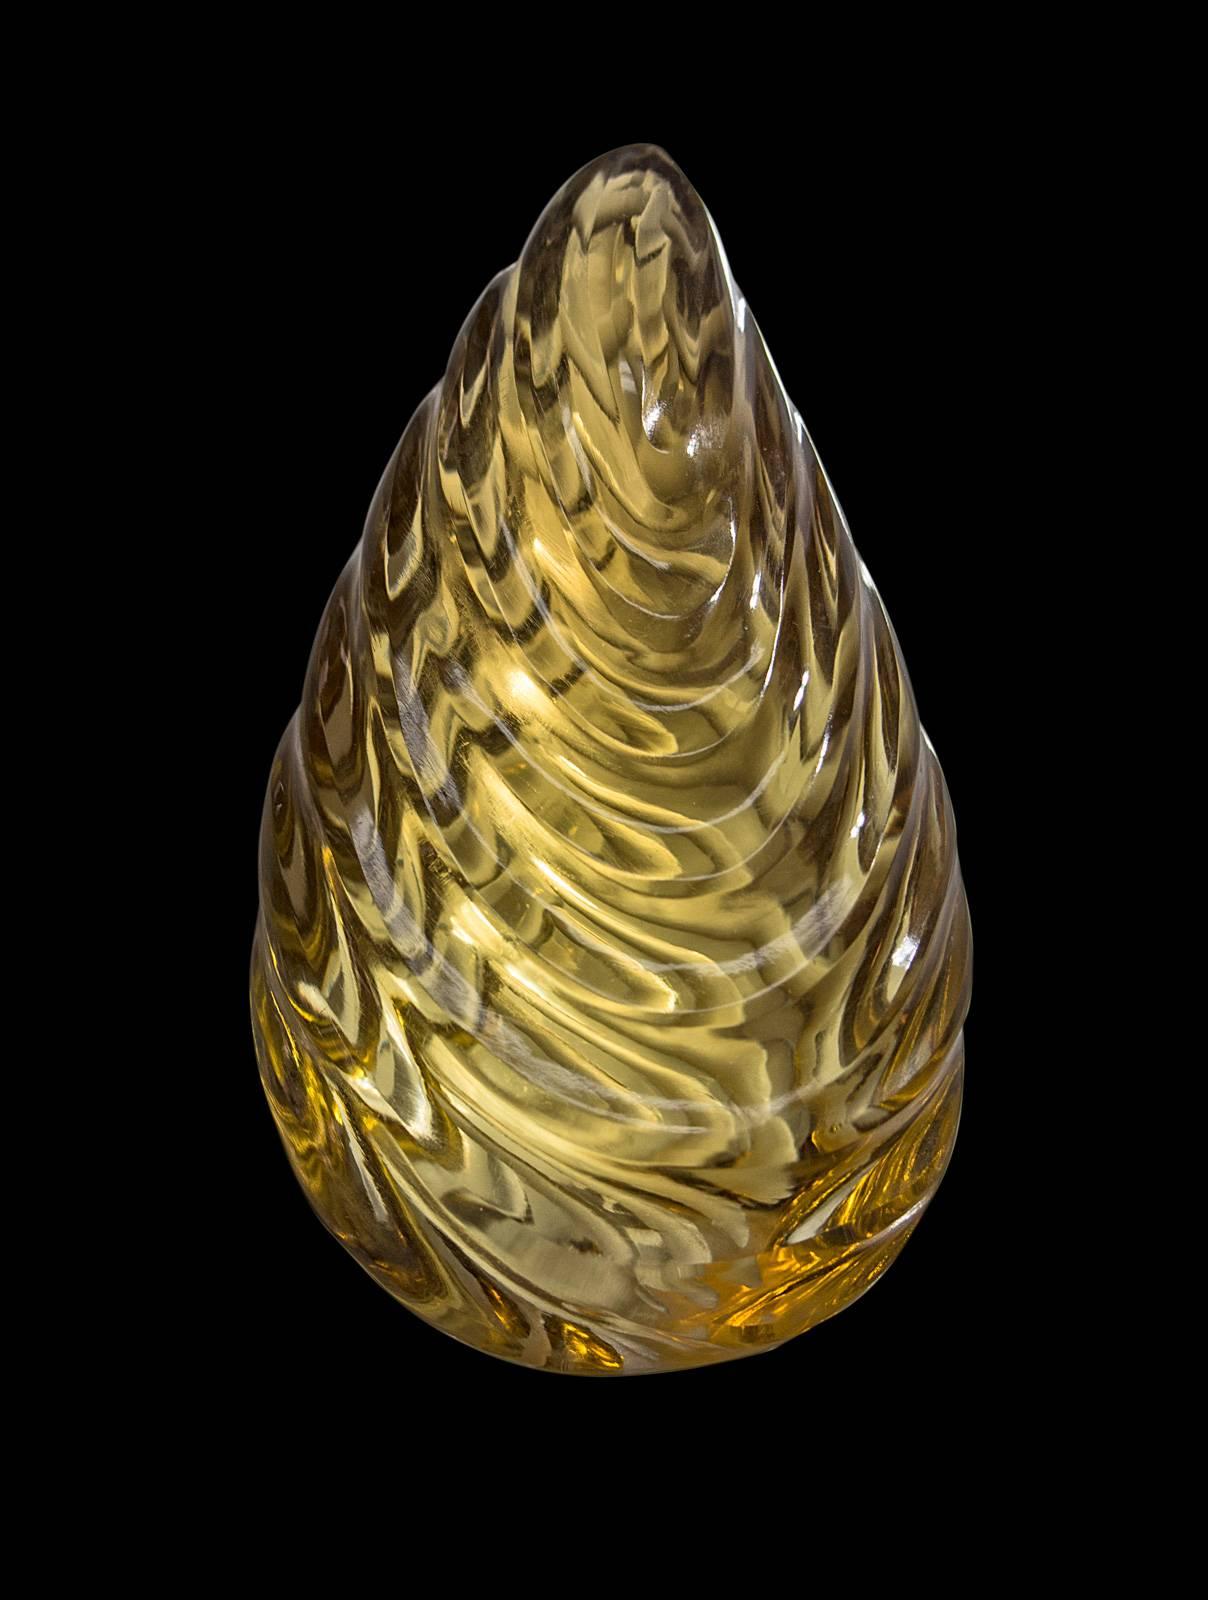 Beautiful hand-carved 104 ct citrine. Entirely one of a kind. 

Can be converted into a pendant upon request for additional cost.

Internationally award winning designer Naomi Sarna creates gem carvings and jewels of unusual beauty. She is